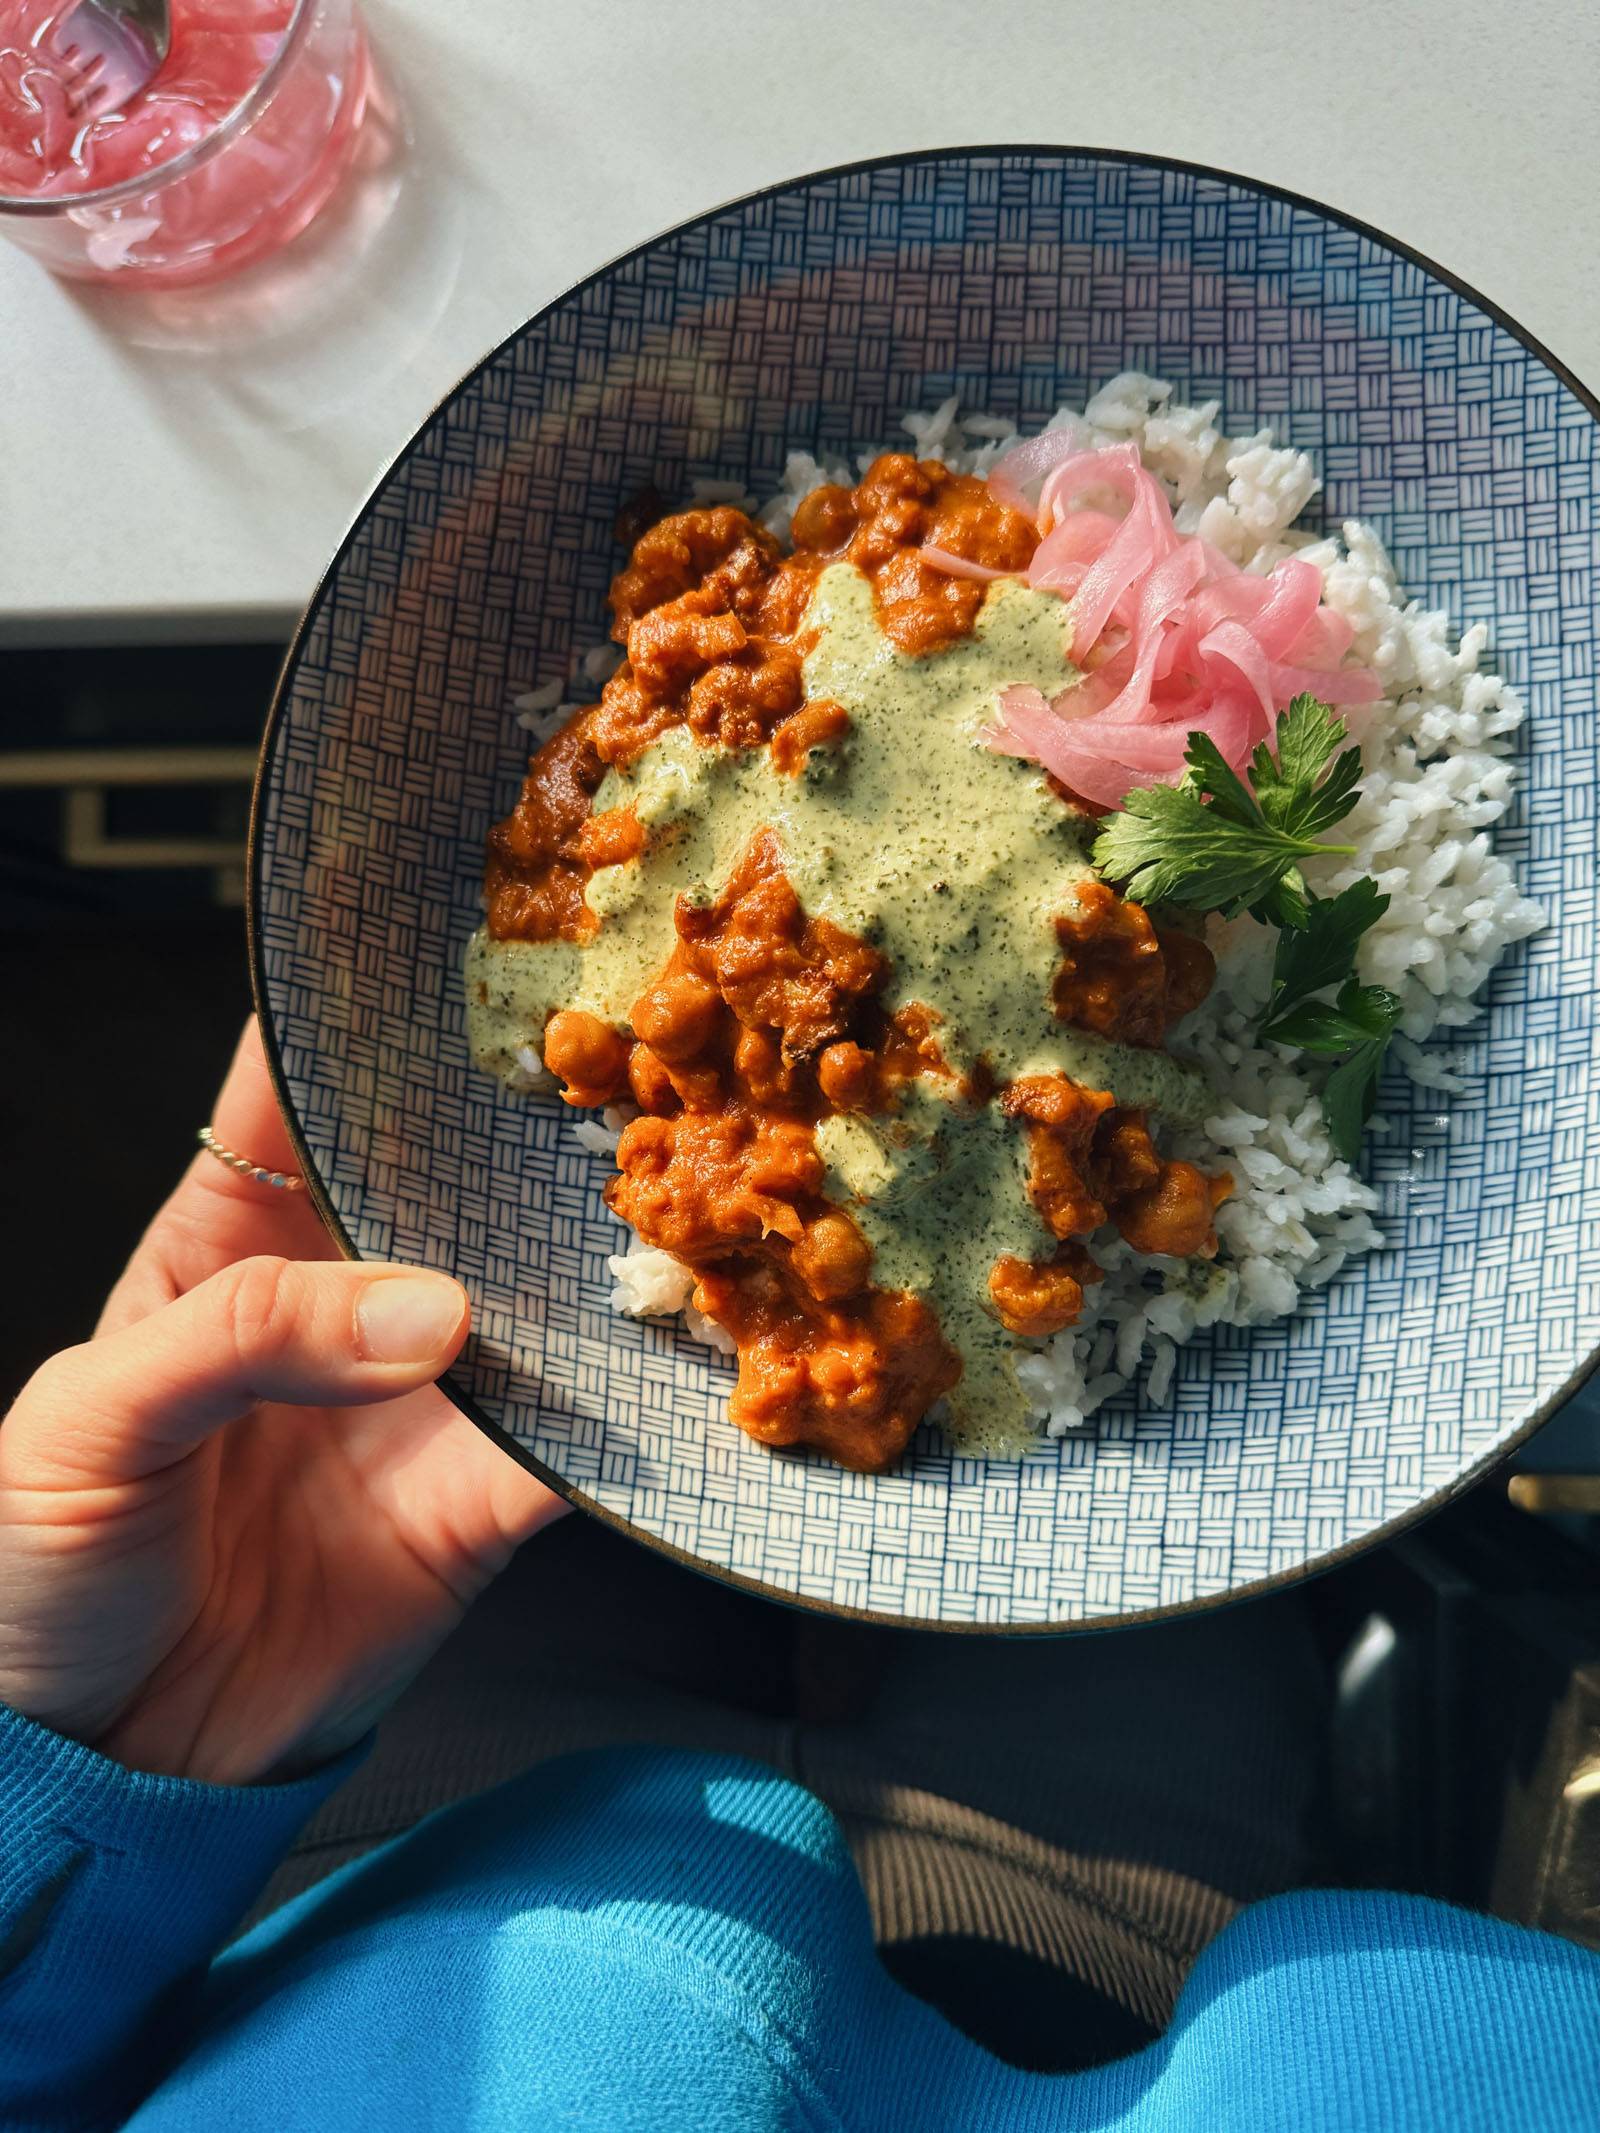 Butter cauliflower and chickpeas in a bowl with rice, mint sauce, cilantro, and pickled onions.